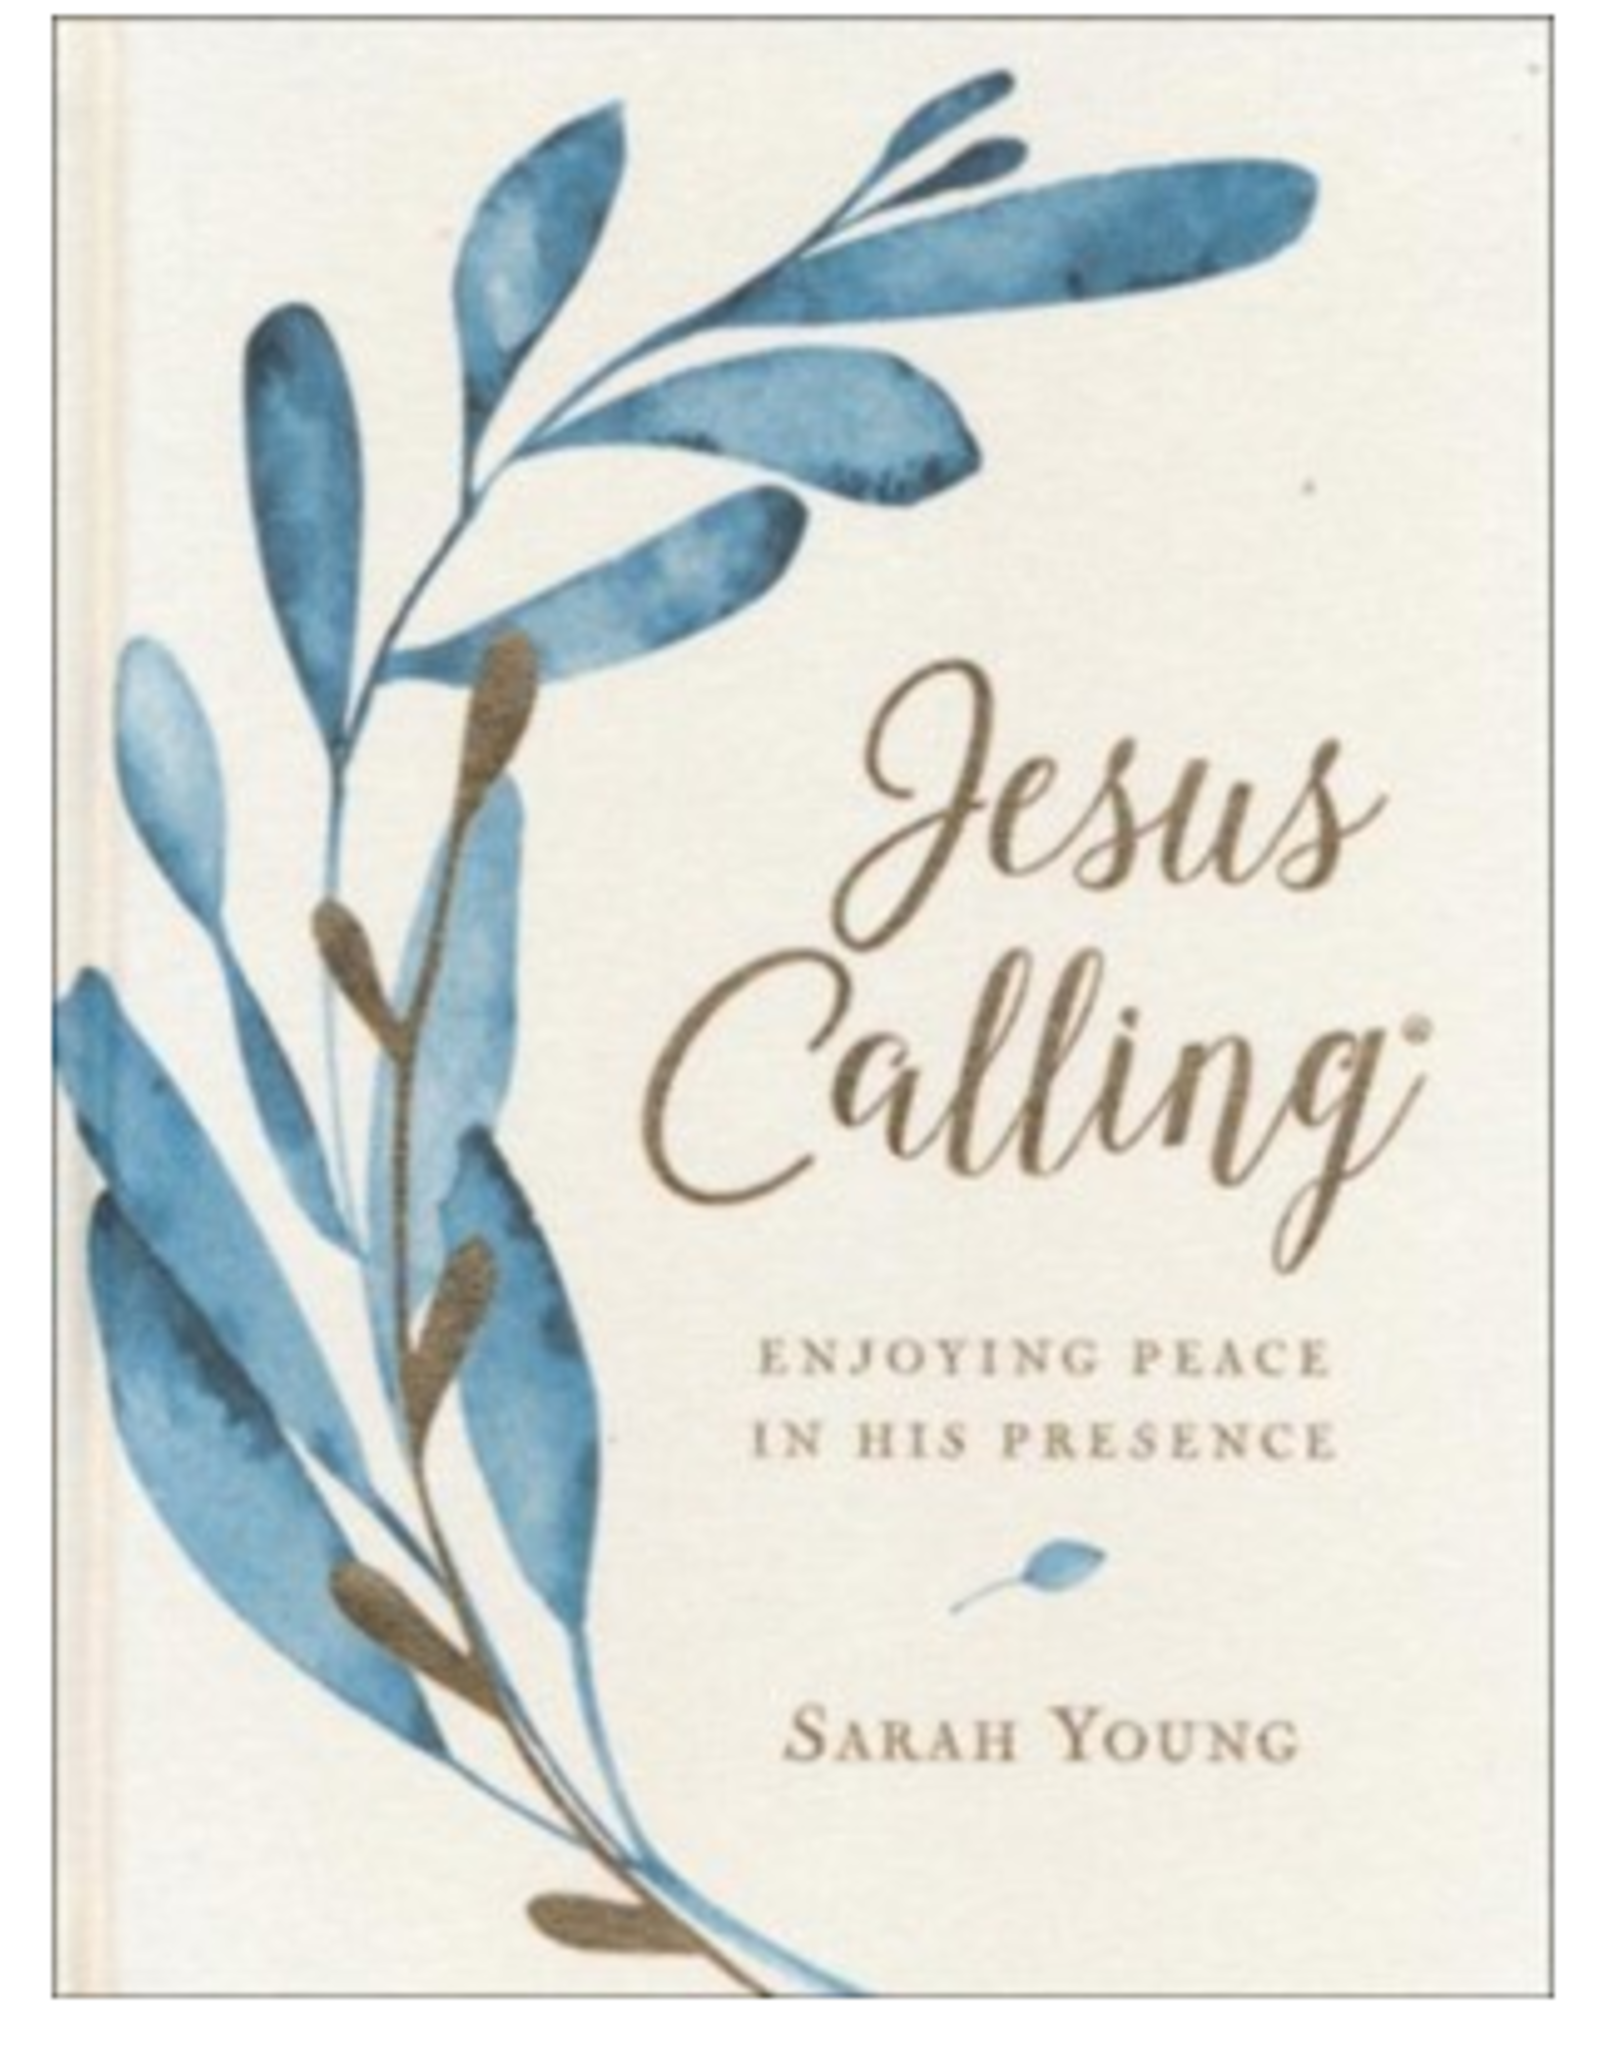 Jesus Calling: Enjoying Peace In His Presence - Teal Cover